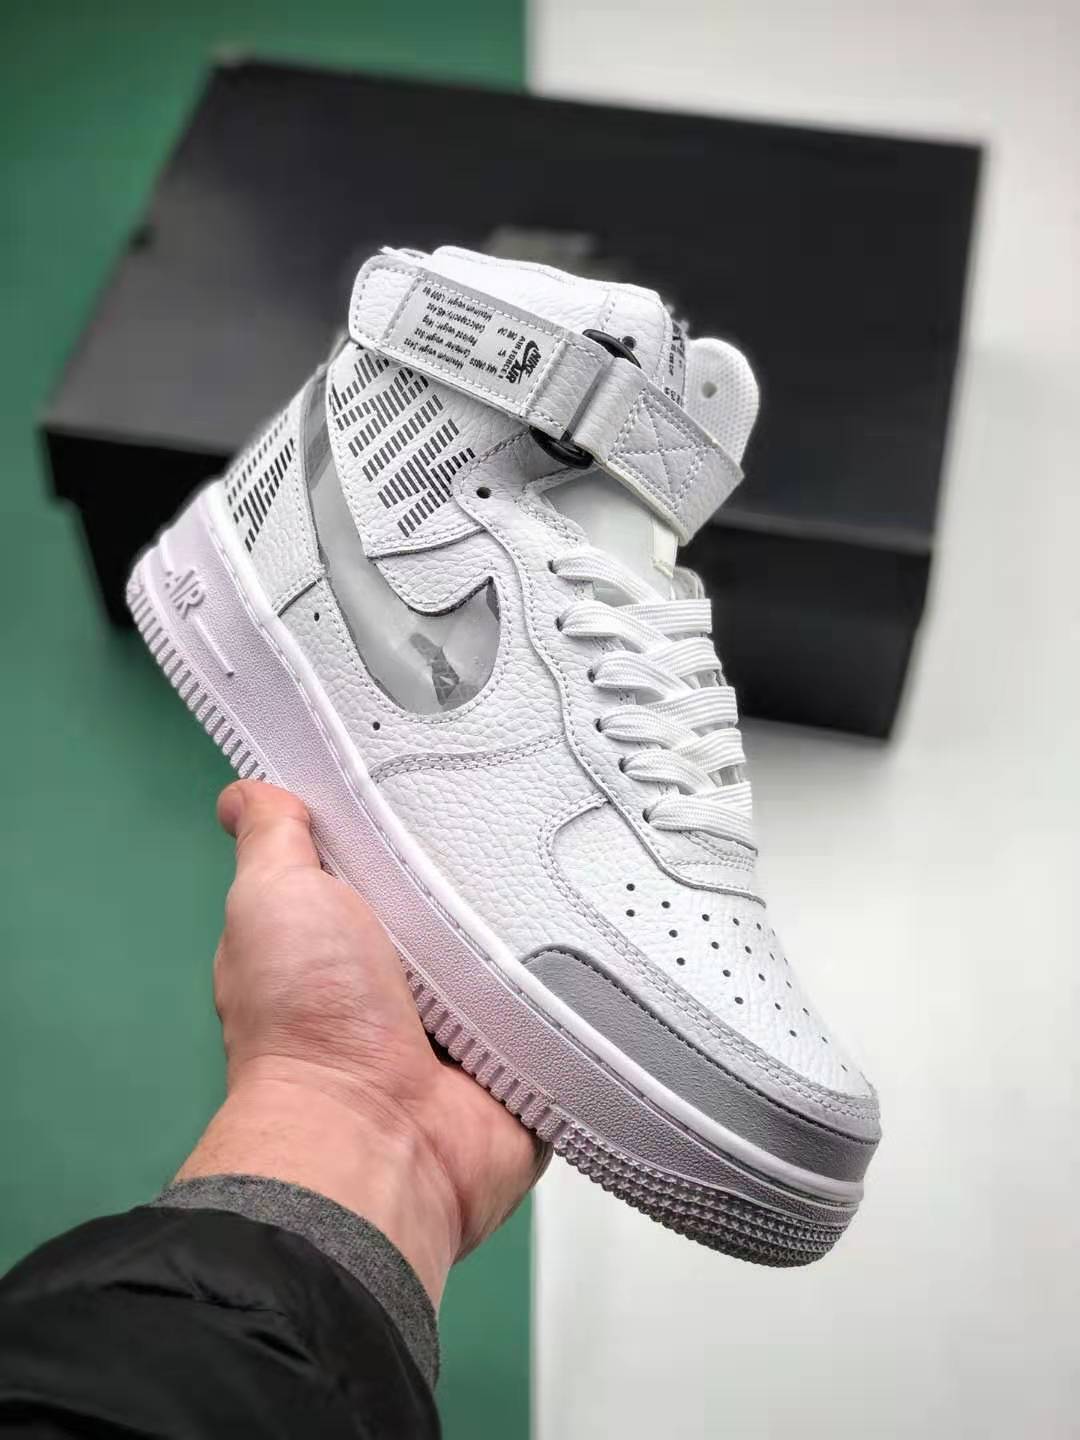 Nike Air Force 1 High Under Construction White CQ0449-100 - Stylish and Durable Iconic Sneakers